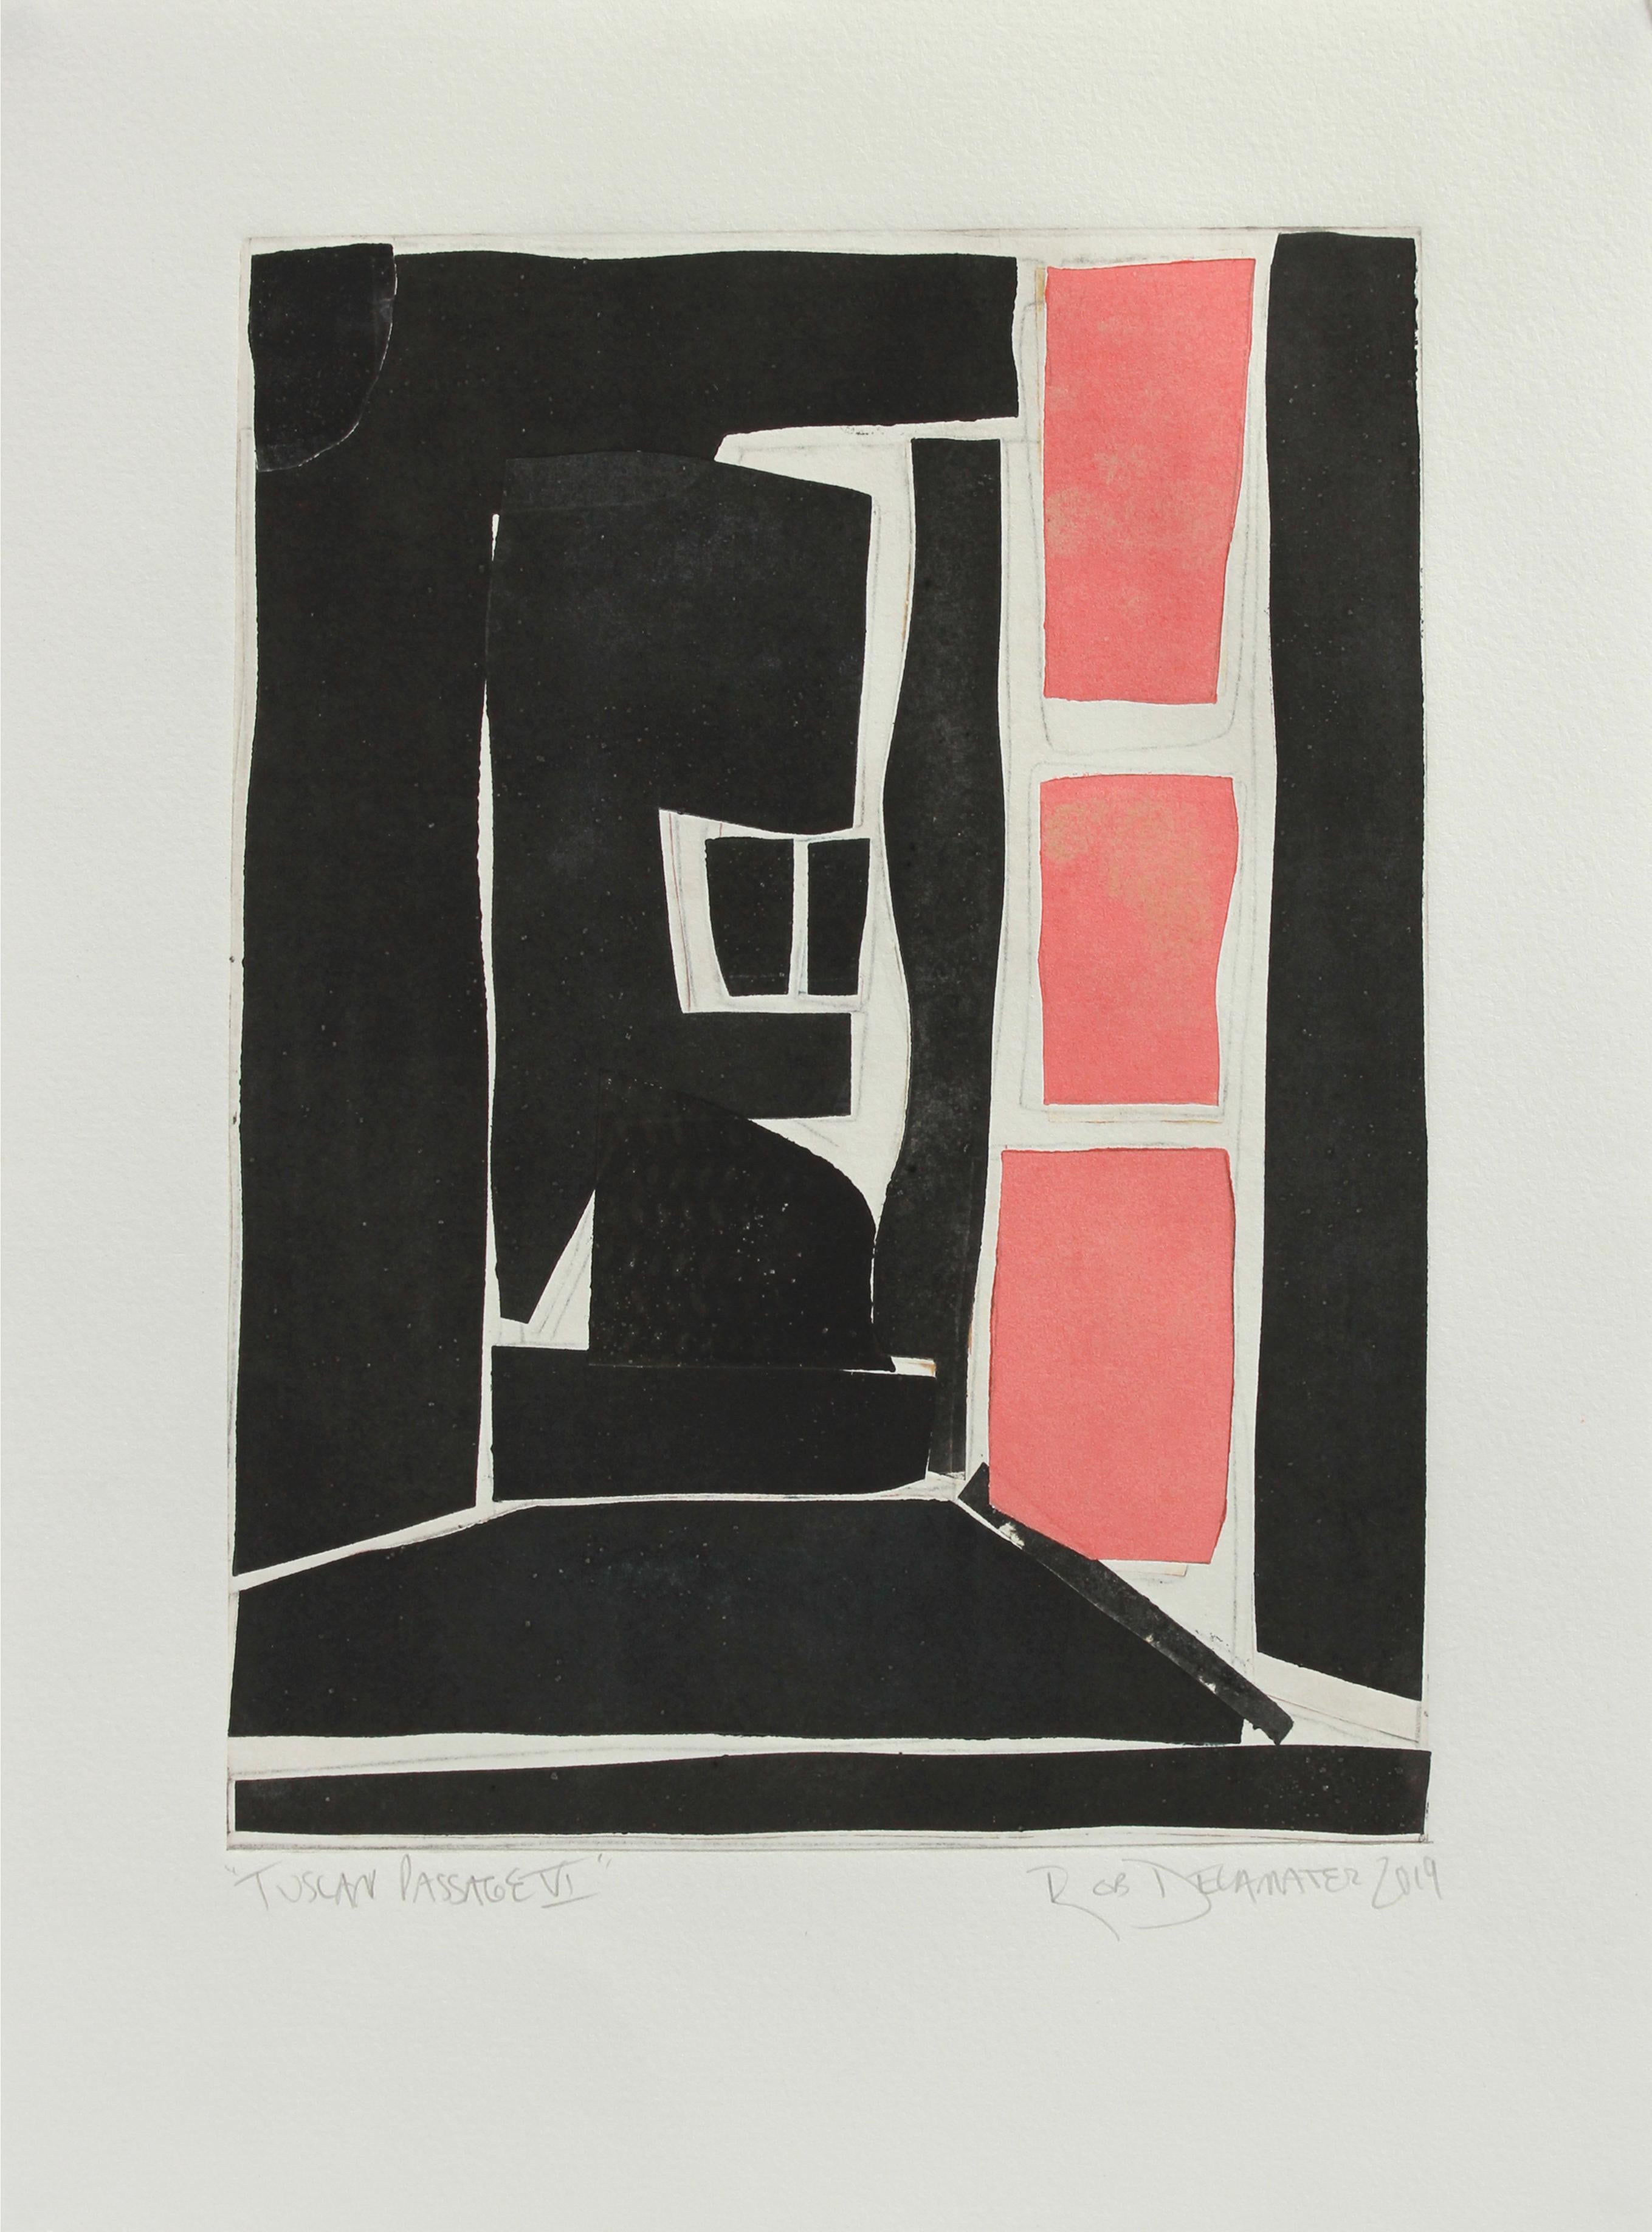 Rob Delamater Abstract Print - "Tuscan Passage VI" Contemporary Monotype on Paper Abstract in Red & Black 